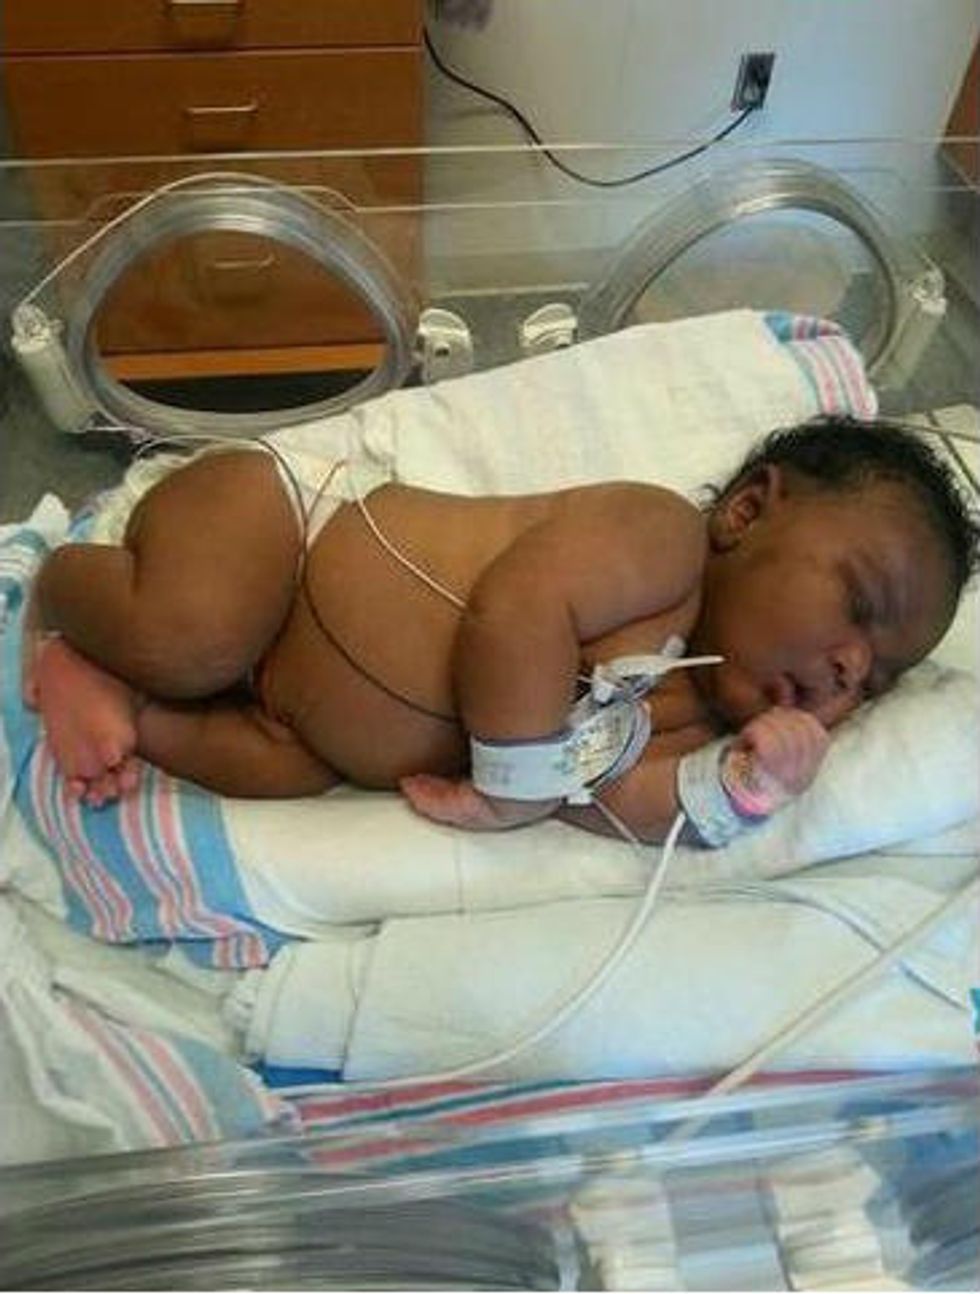 Woman Who Had No Idea She Was Pregnant Until 35 Weeks Delivers 14-Pound Baby